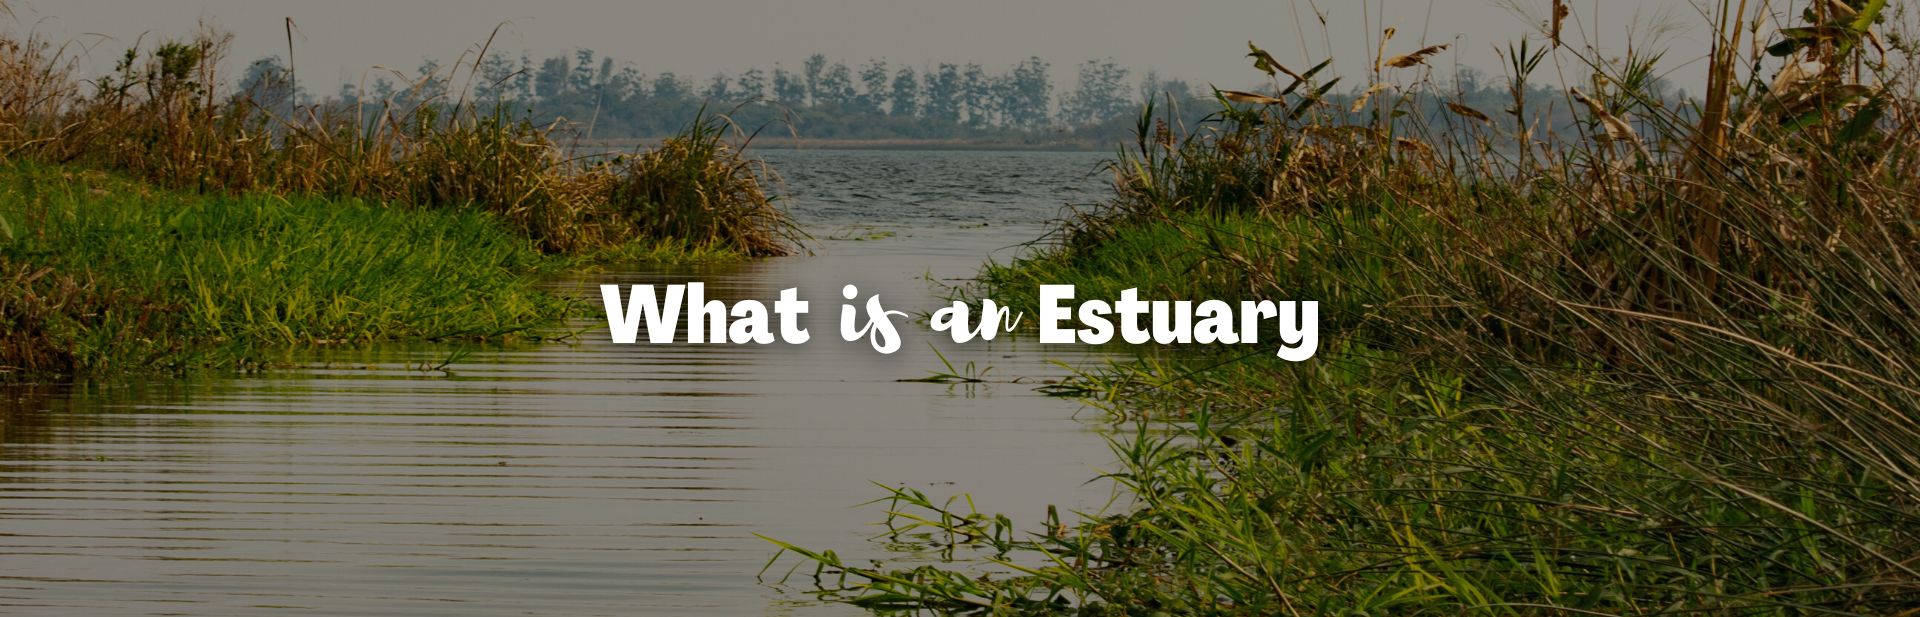 What Is an Estuary? Estuaries Around the World & More!